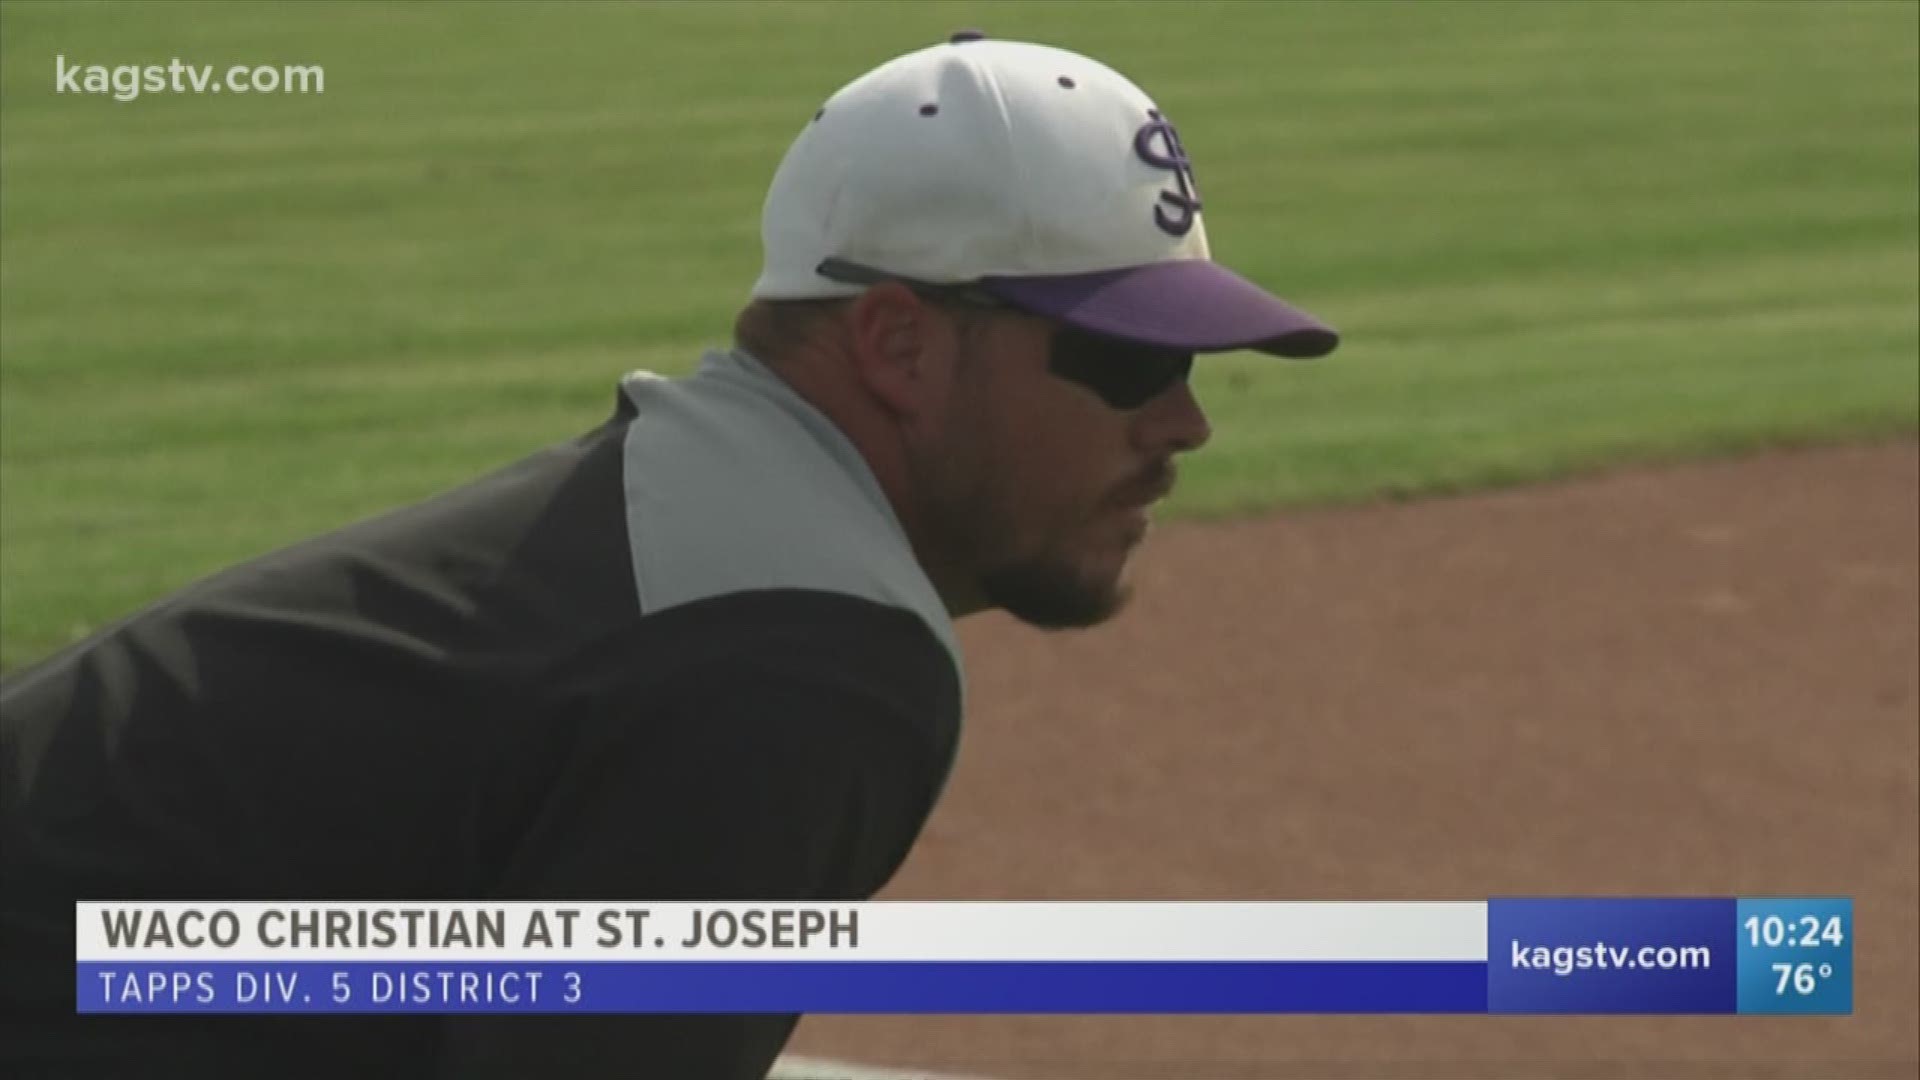 St. Joseph defeated Waco Christian 15-0 in three innings on Tuesday afternoon.